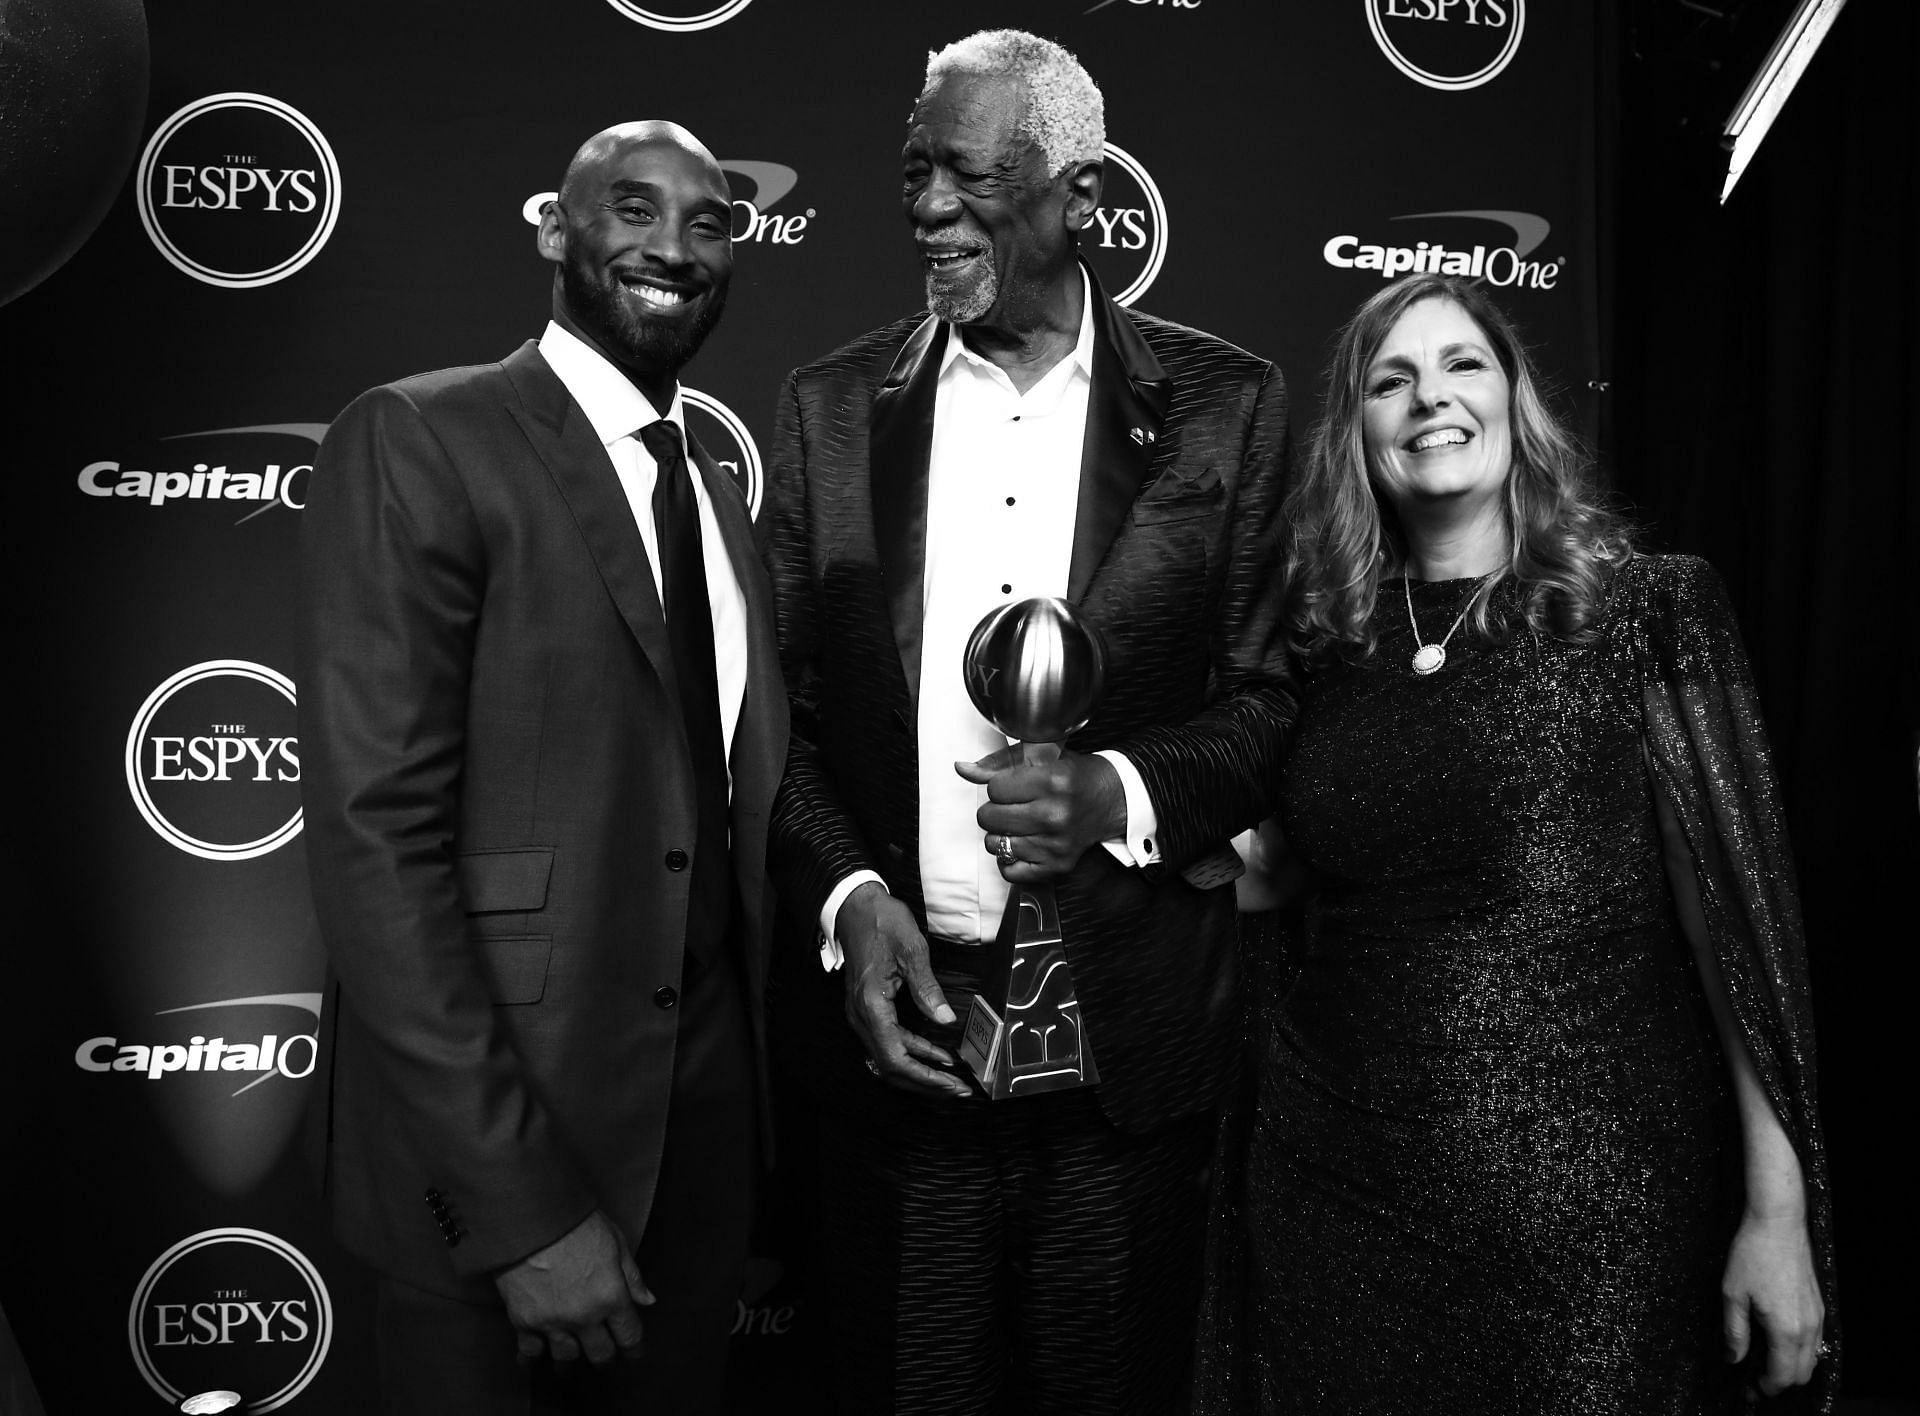 Kobe Bryant and Bill Russell at the 2019 ESPYs - Inside